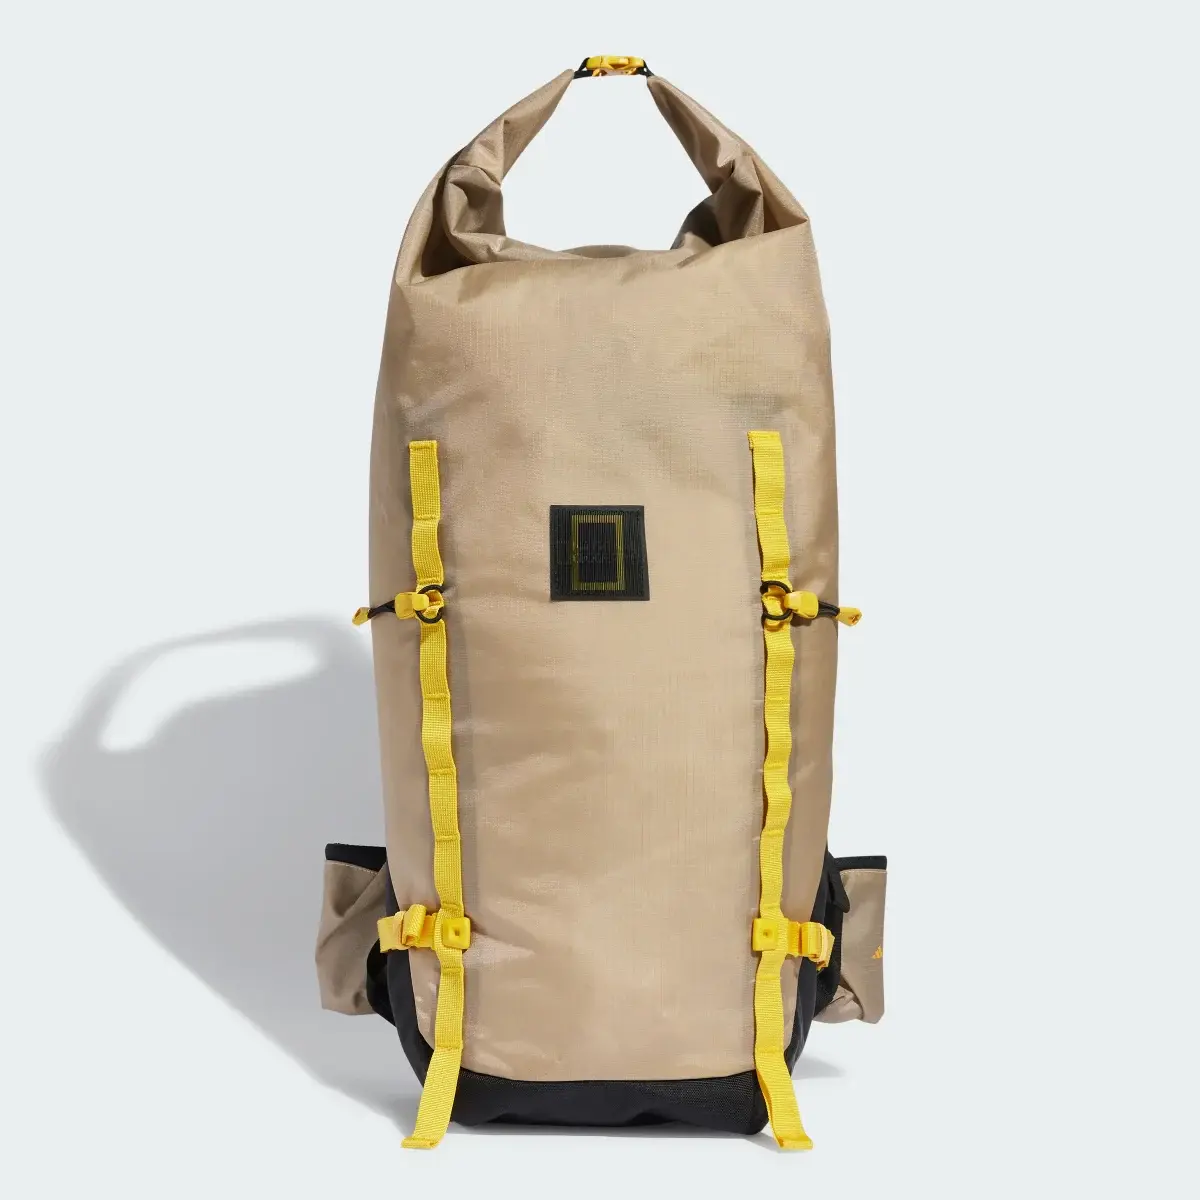 Adidas Terrex x National Geographic Hike Backpack. 2